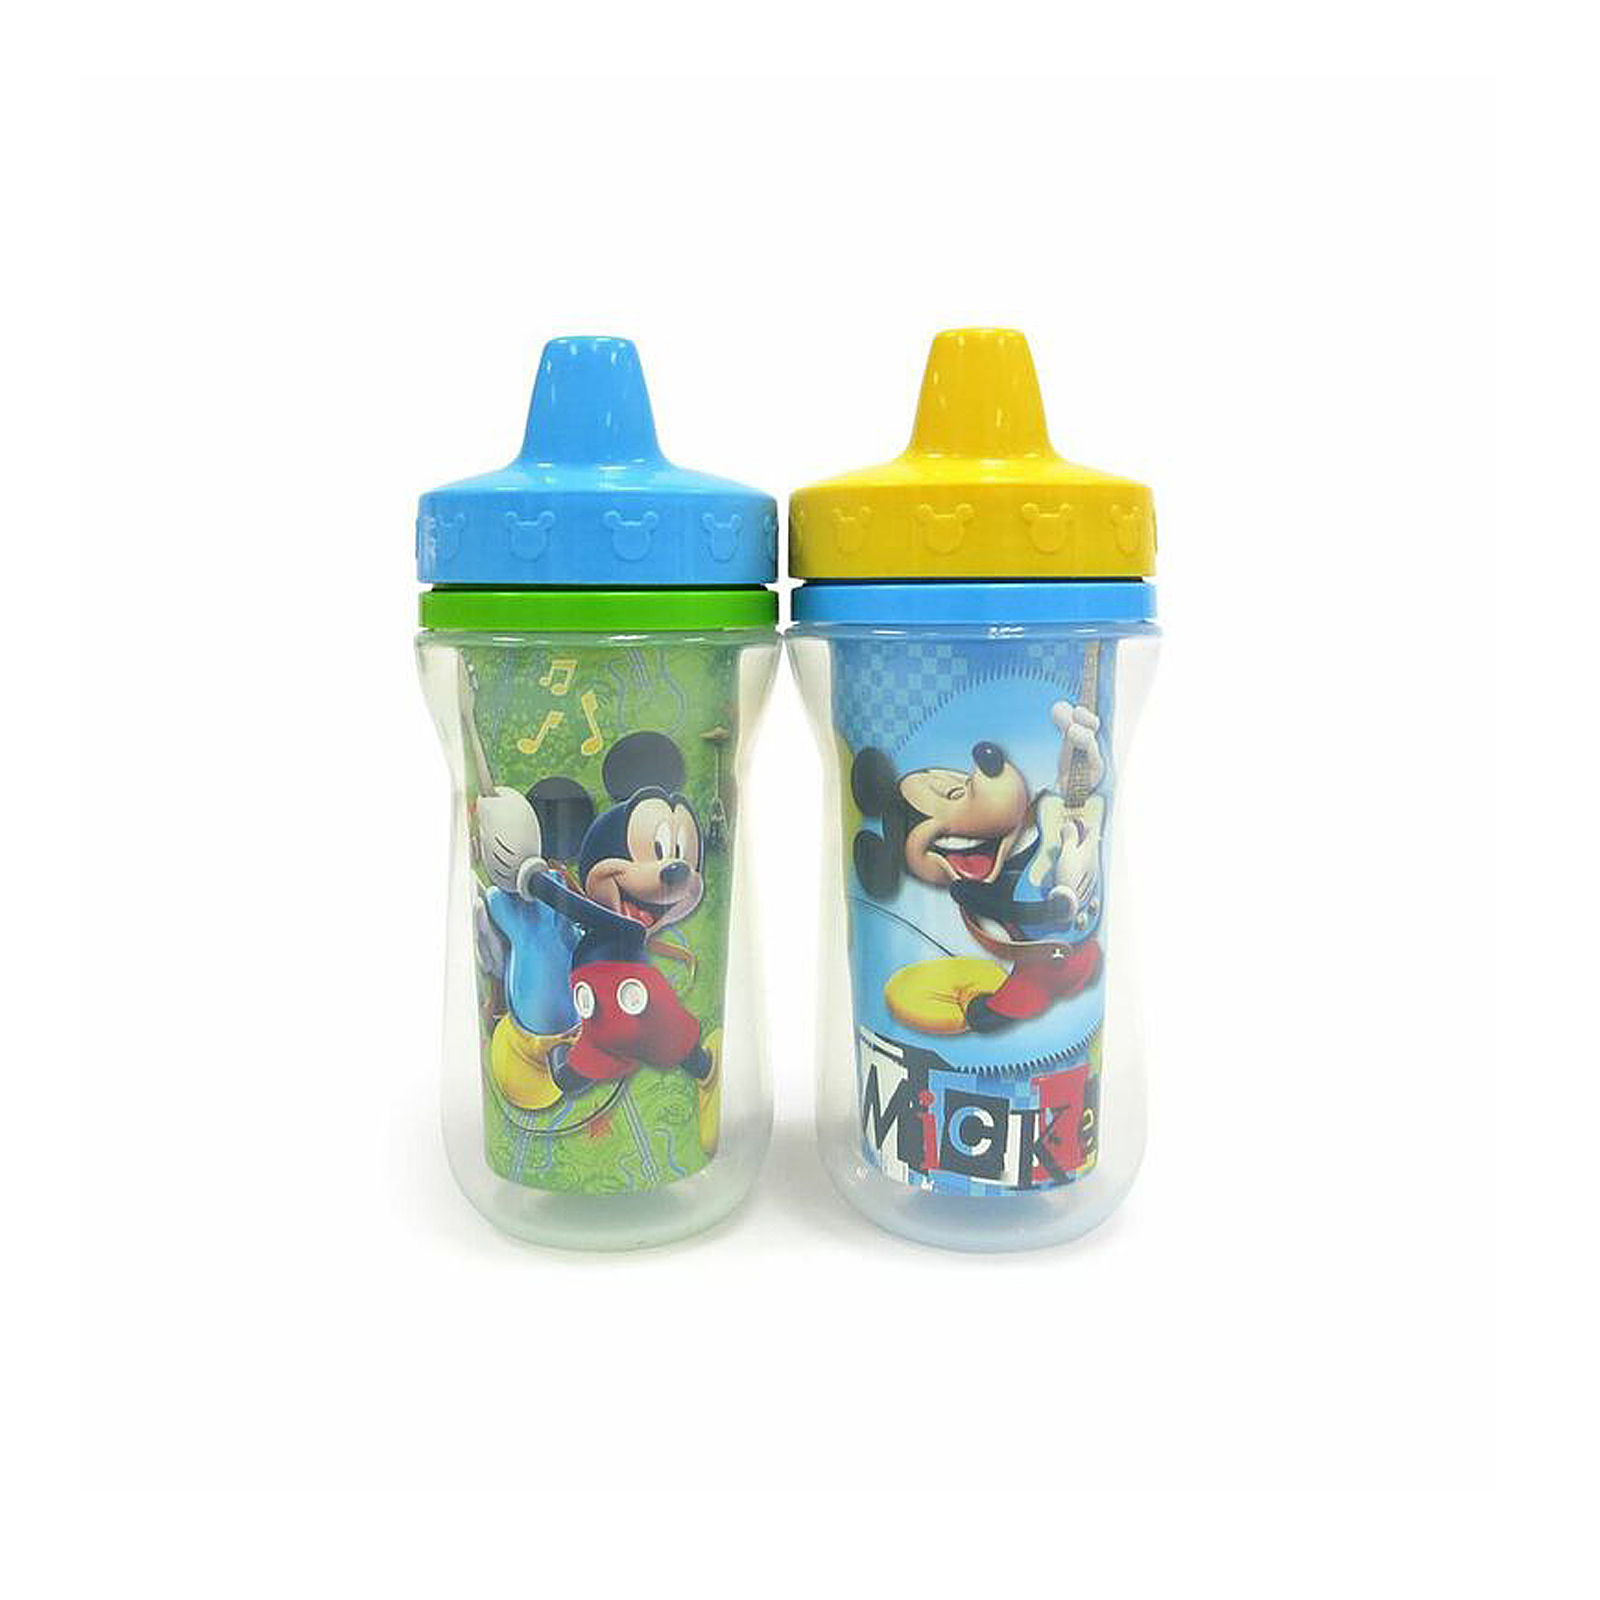 0071463103416 - MICKEY MOUSE 2-PK. INSULATED SIPPY CUPS